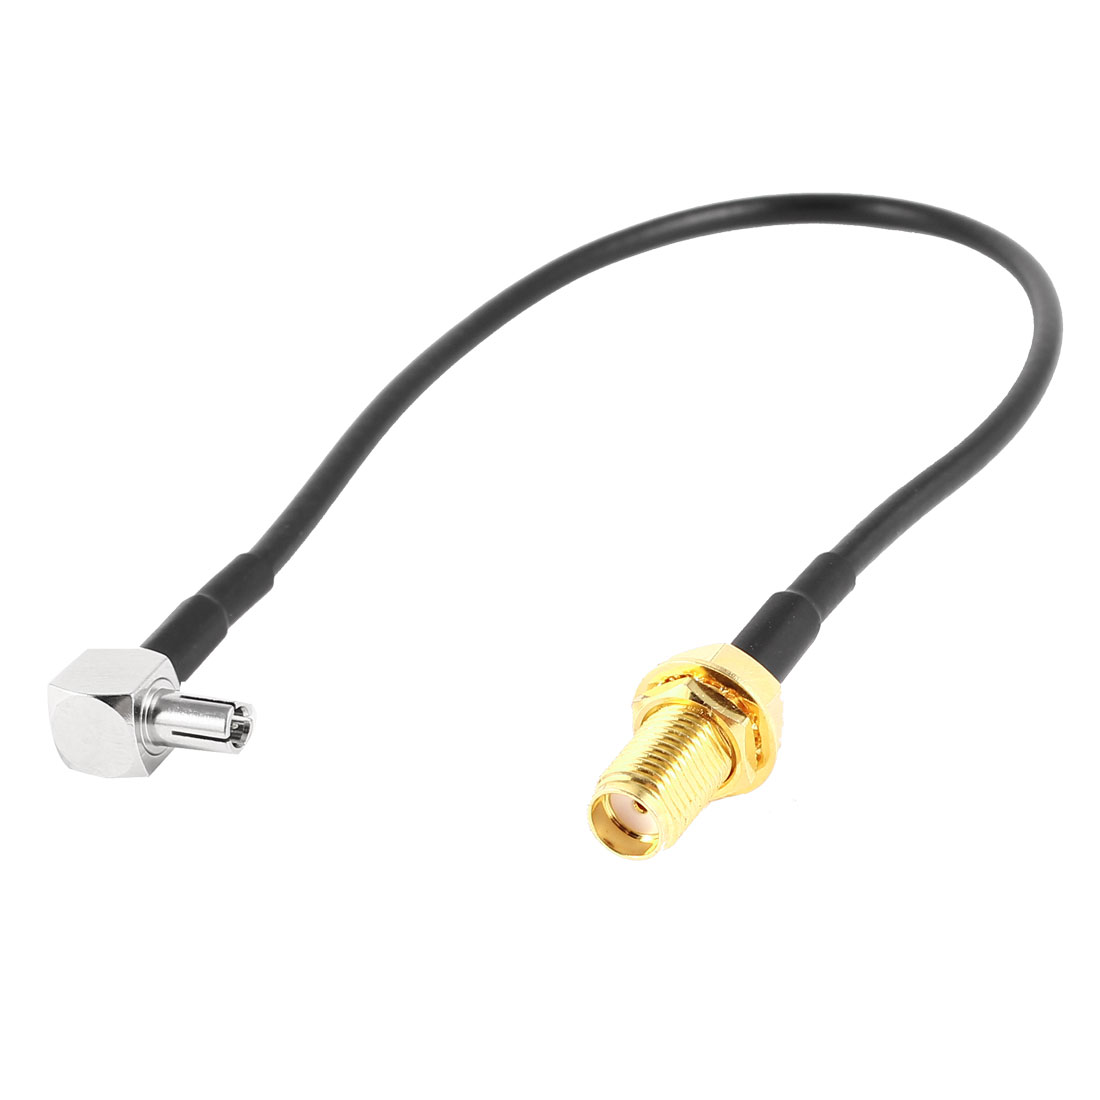 Unique Bargains TS9 Male Right Angle to SMA Female Jack Antenna Jumper Coaxial Cable 22cm